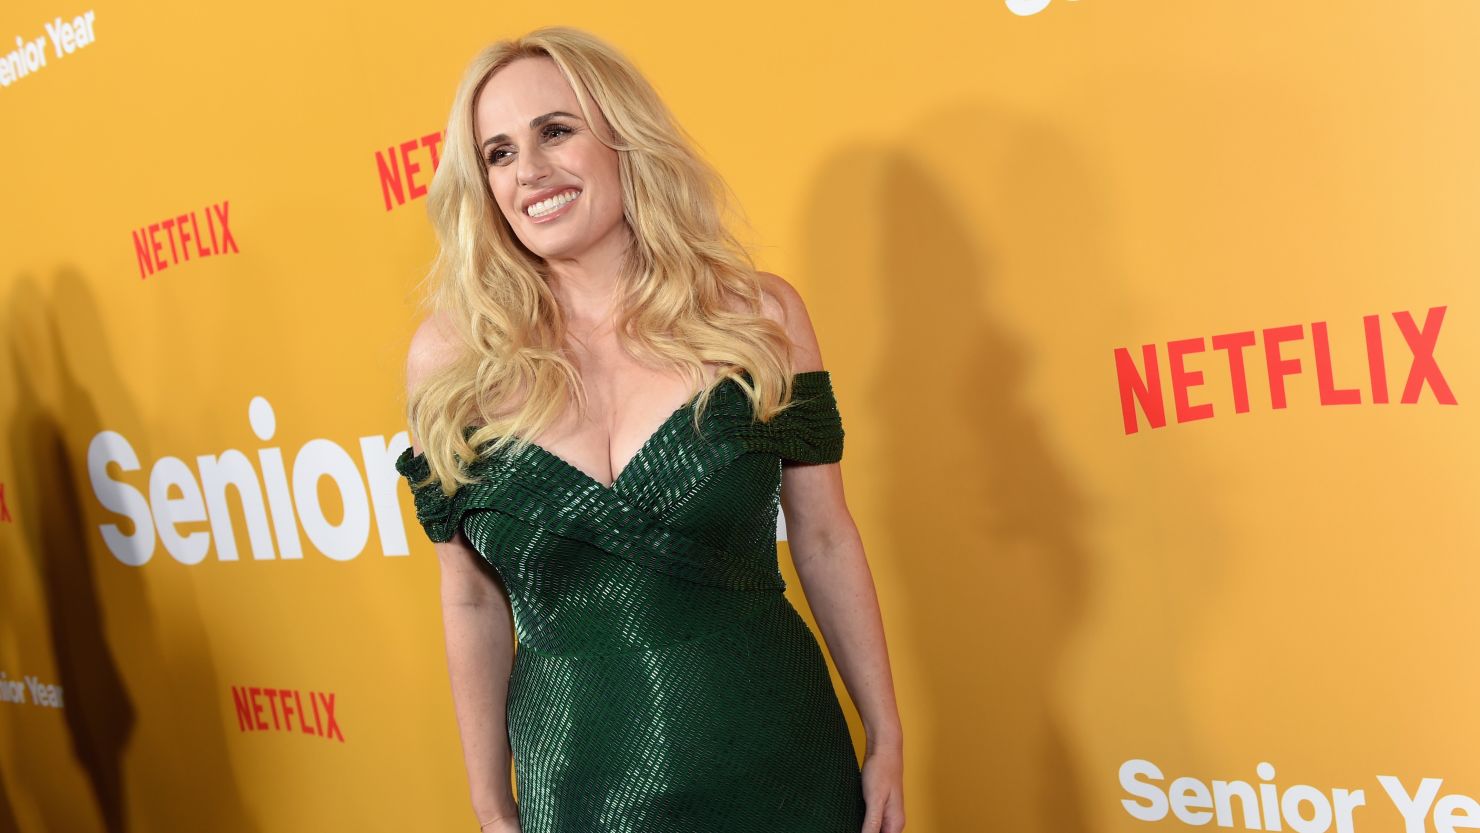 Rebel Wilson attends the Netflix "Senior Year" special screening at the London West Hollywood at Beverly Hills hotel in Los Angeles on May 10, 2022.